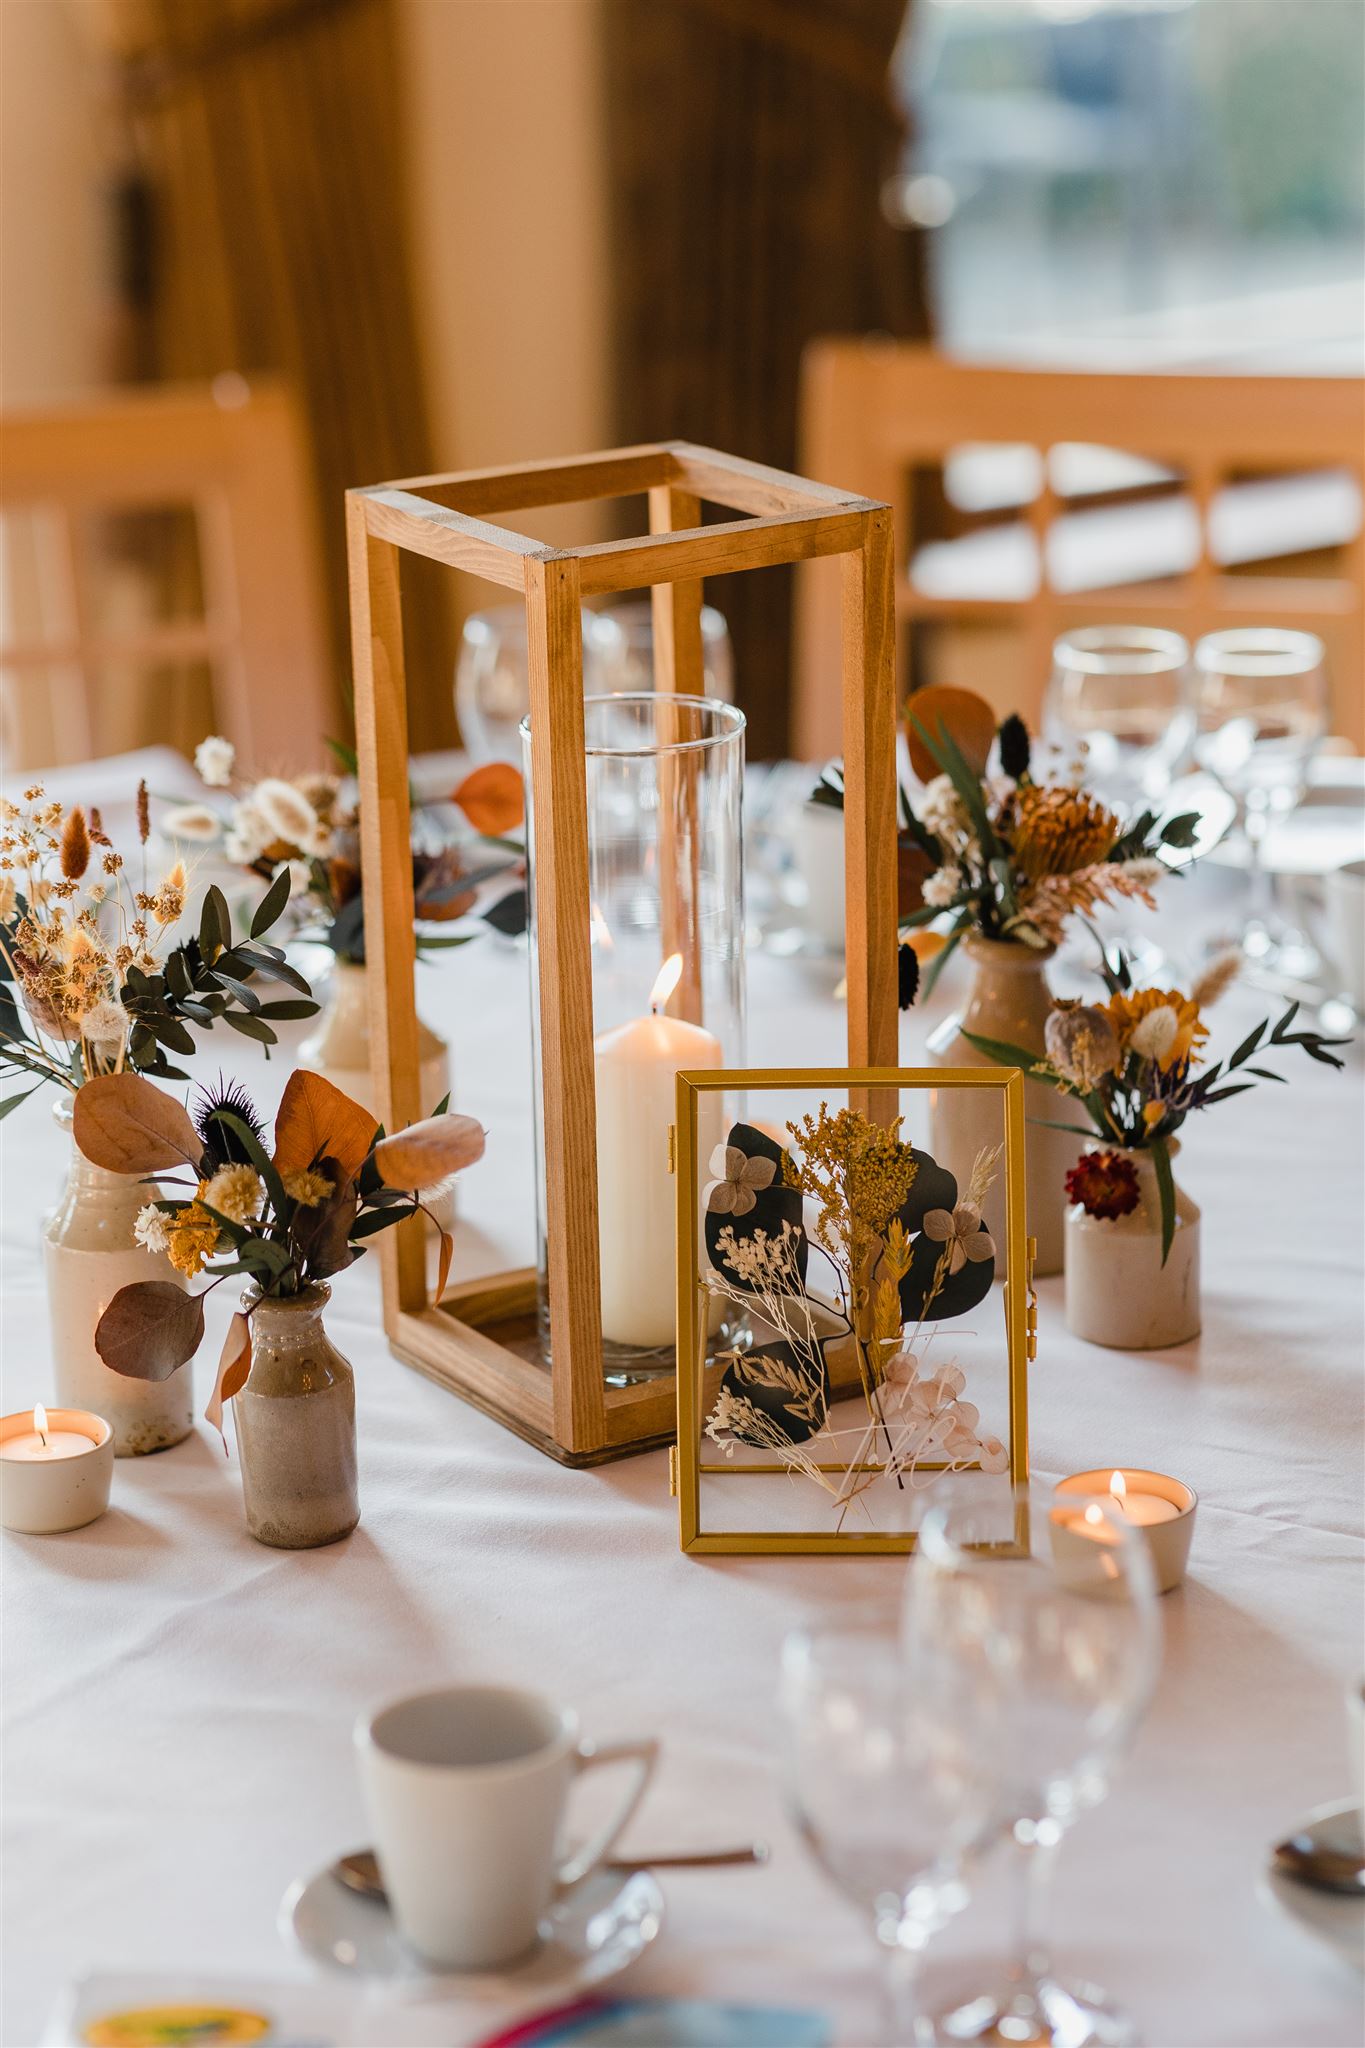 Dried flowers in small stoneware vases and a pillar candle in wooden box frame centre a wedding reception table.